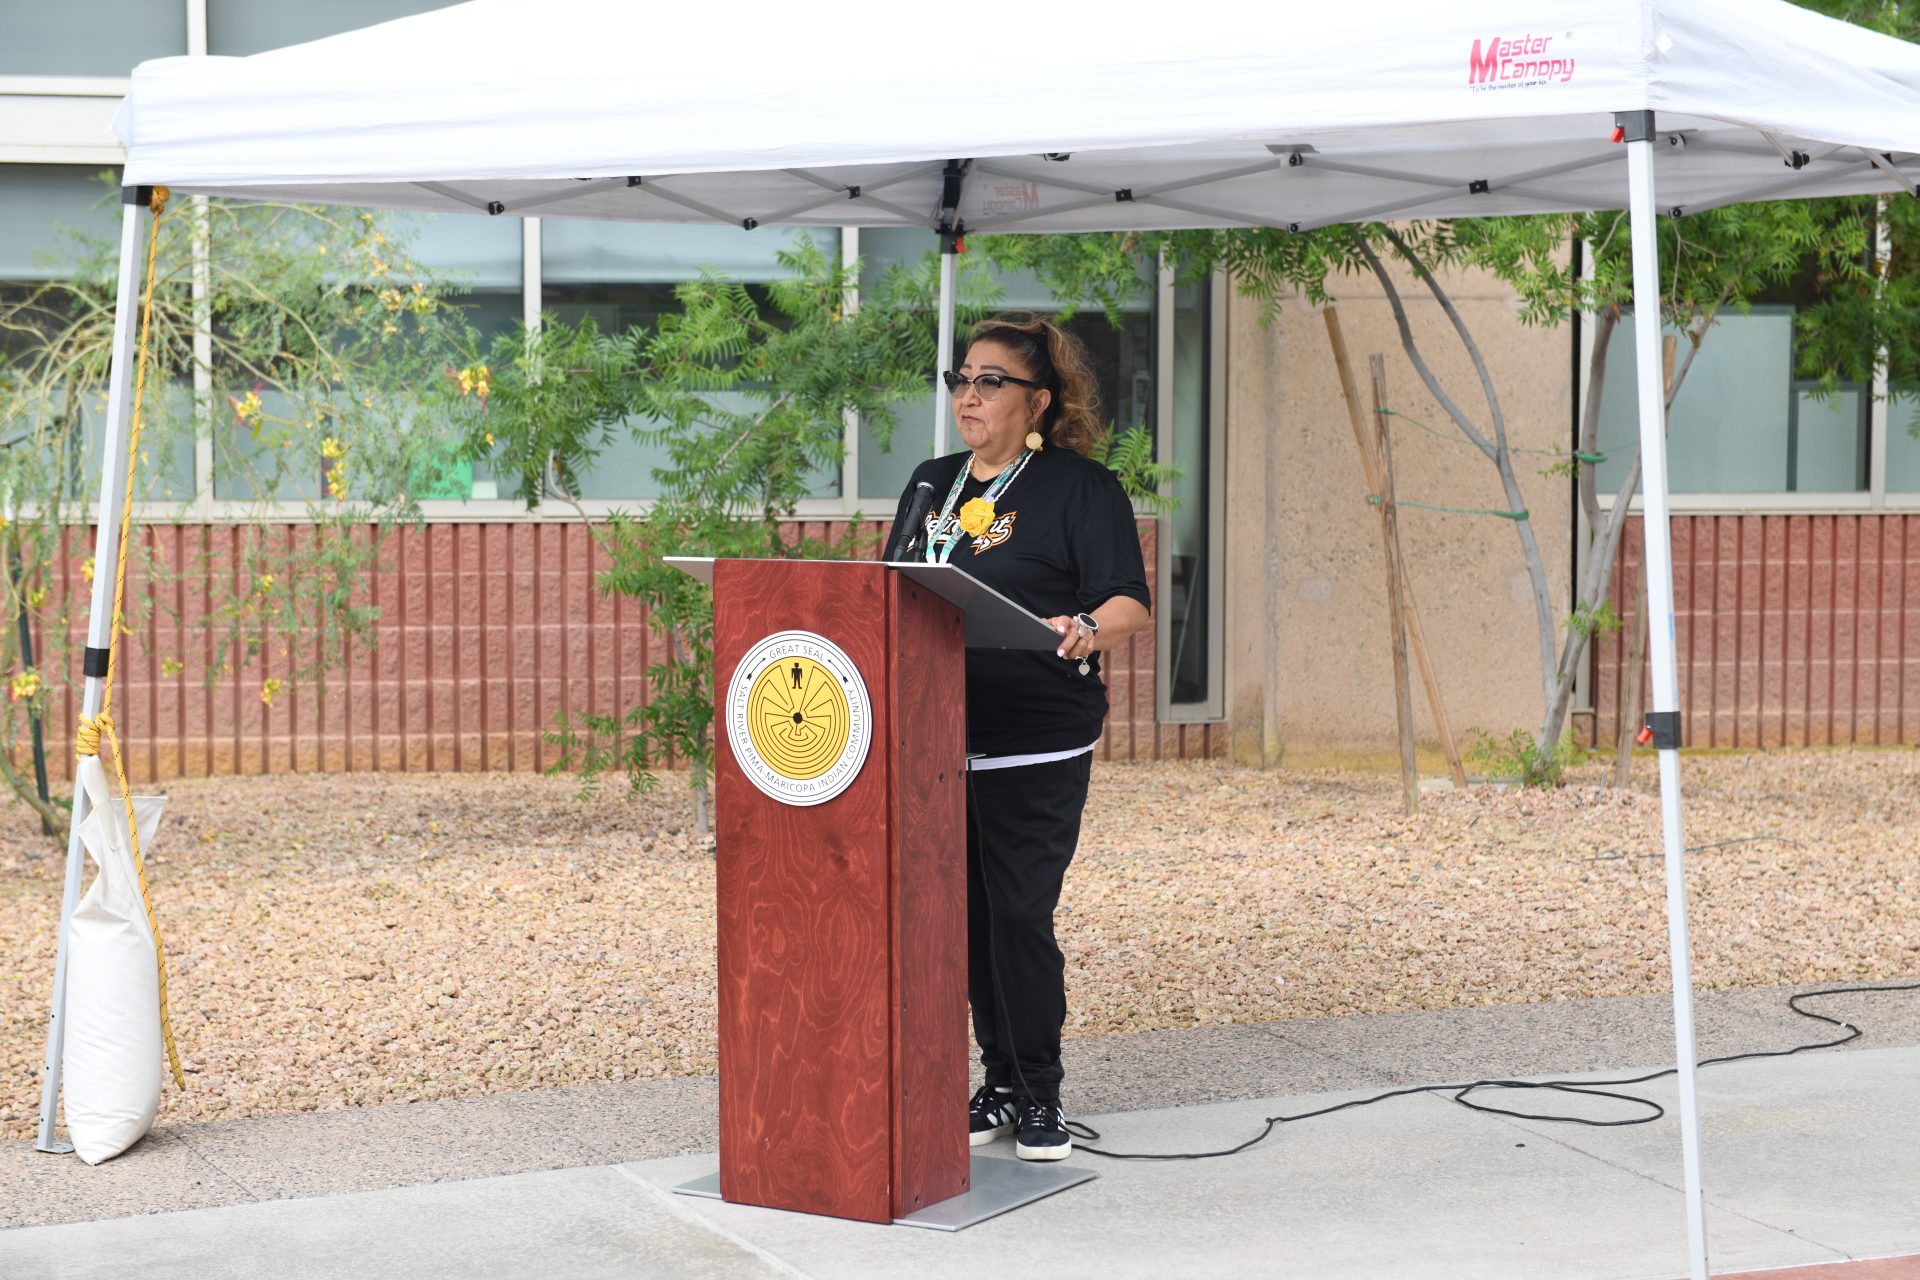 Former HR Director Robin Enos Honored With Ash Tree Dedication